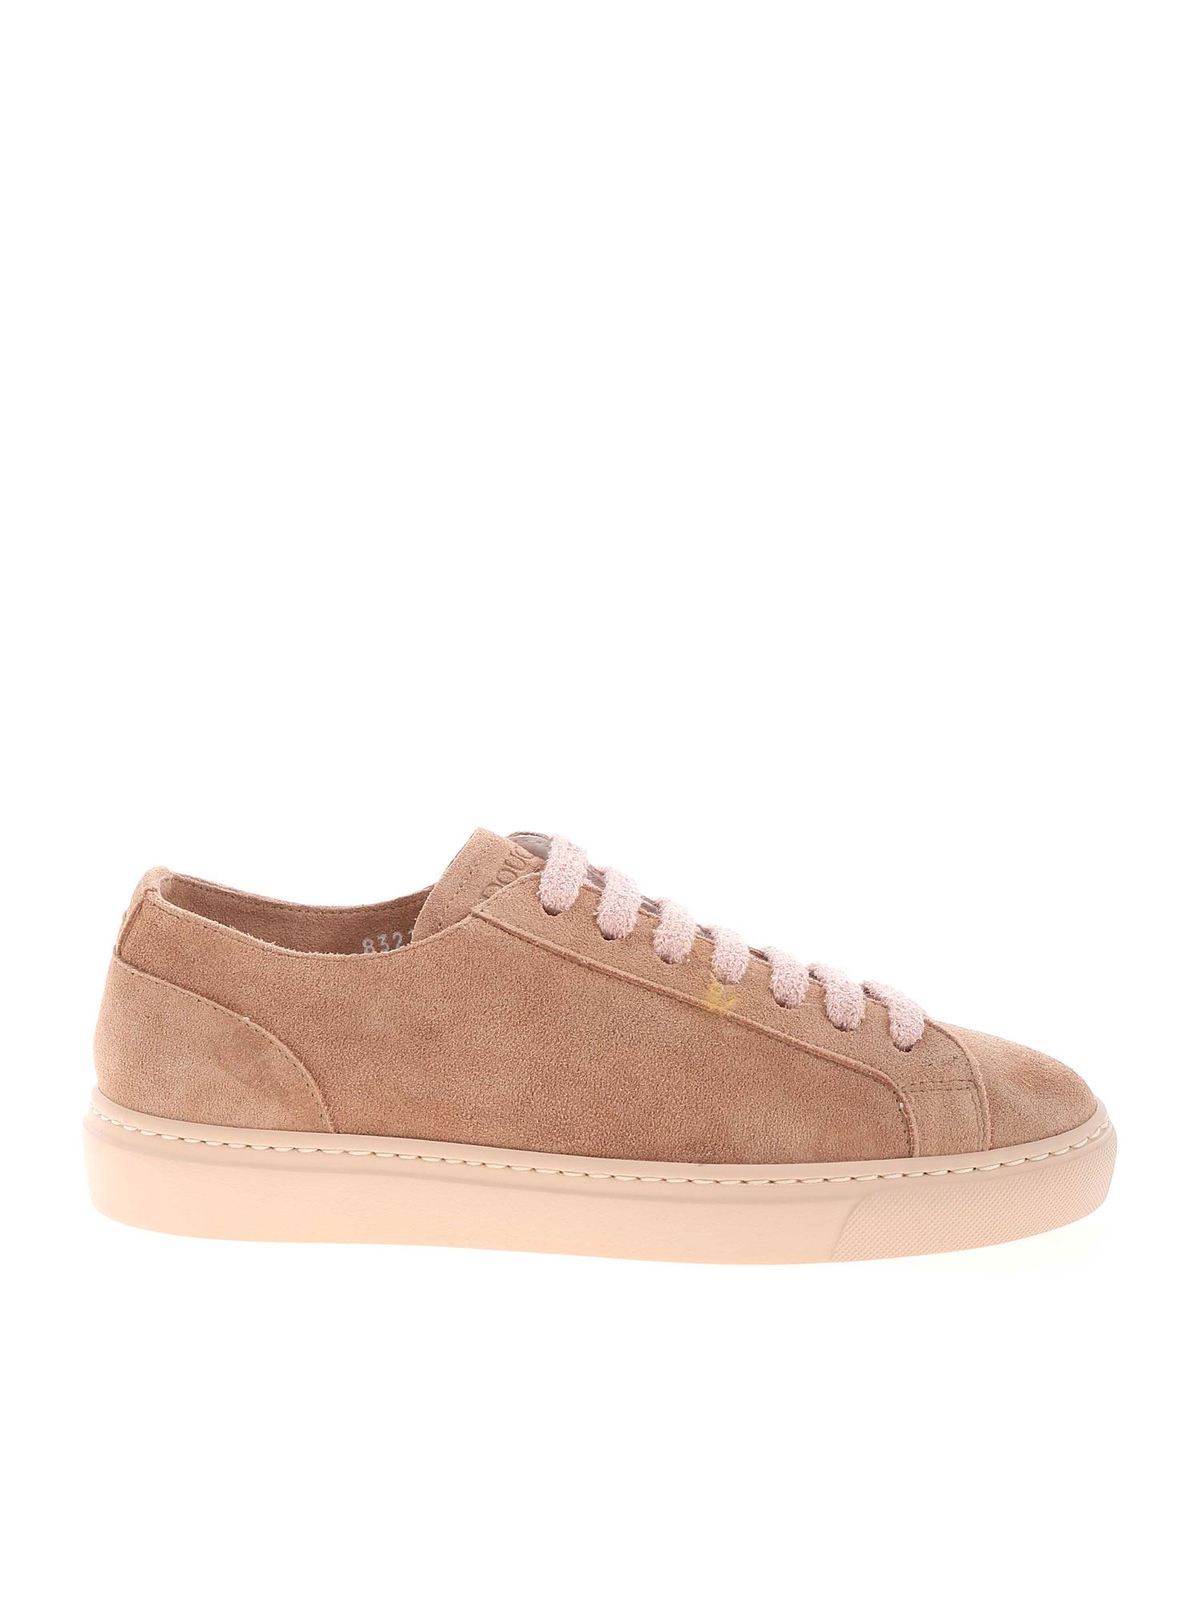 Doucal's BALI SNEAKERS IN PINK